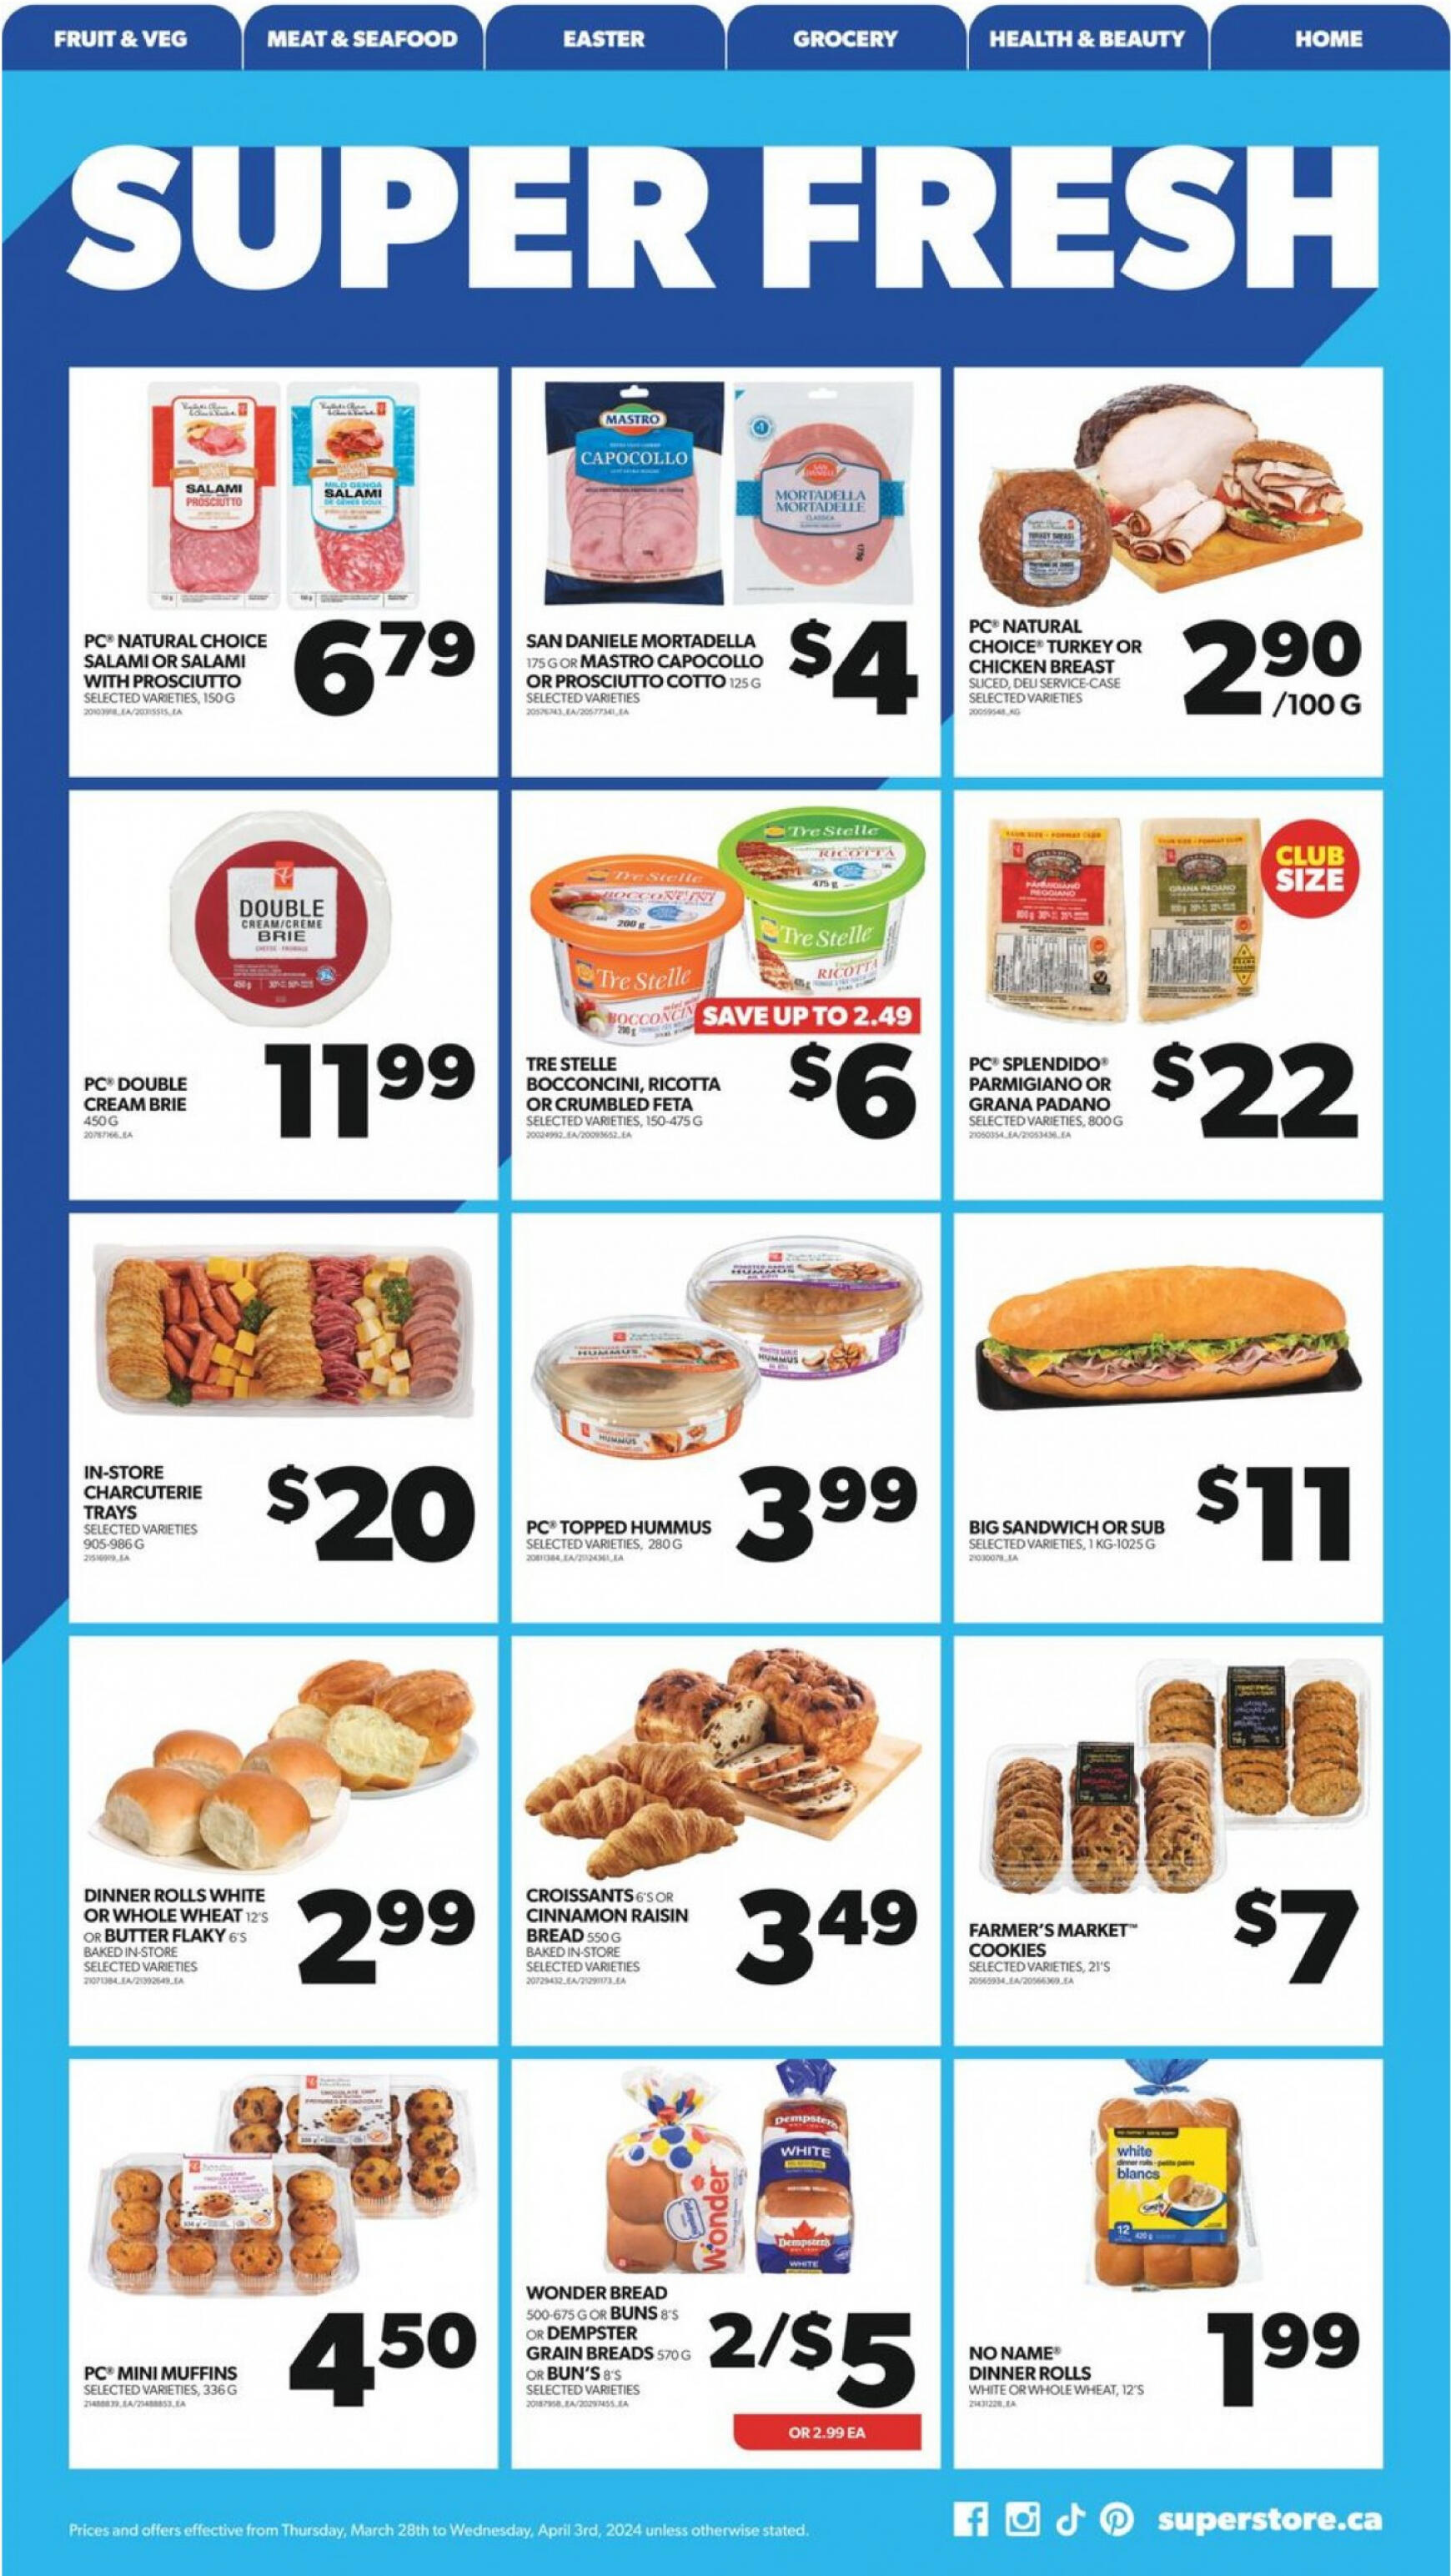 real-canadian-superstore - Real Canadian Superstore flyer current 28.03. - 03.04. - page: 14